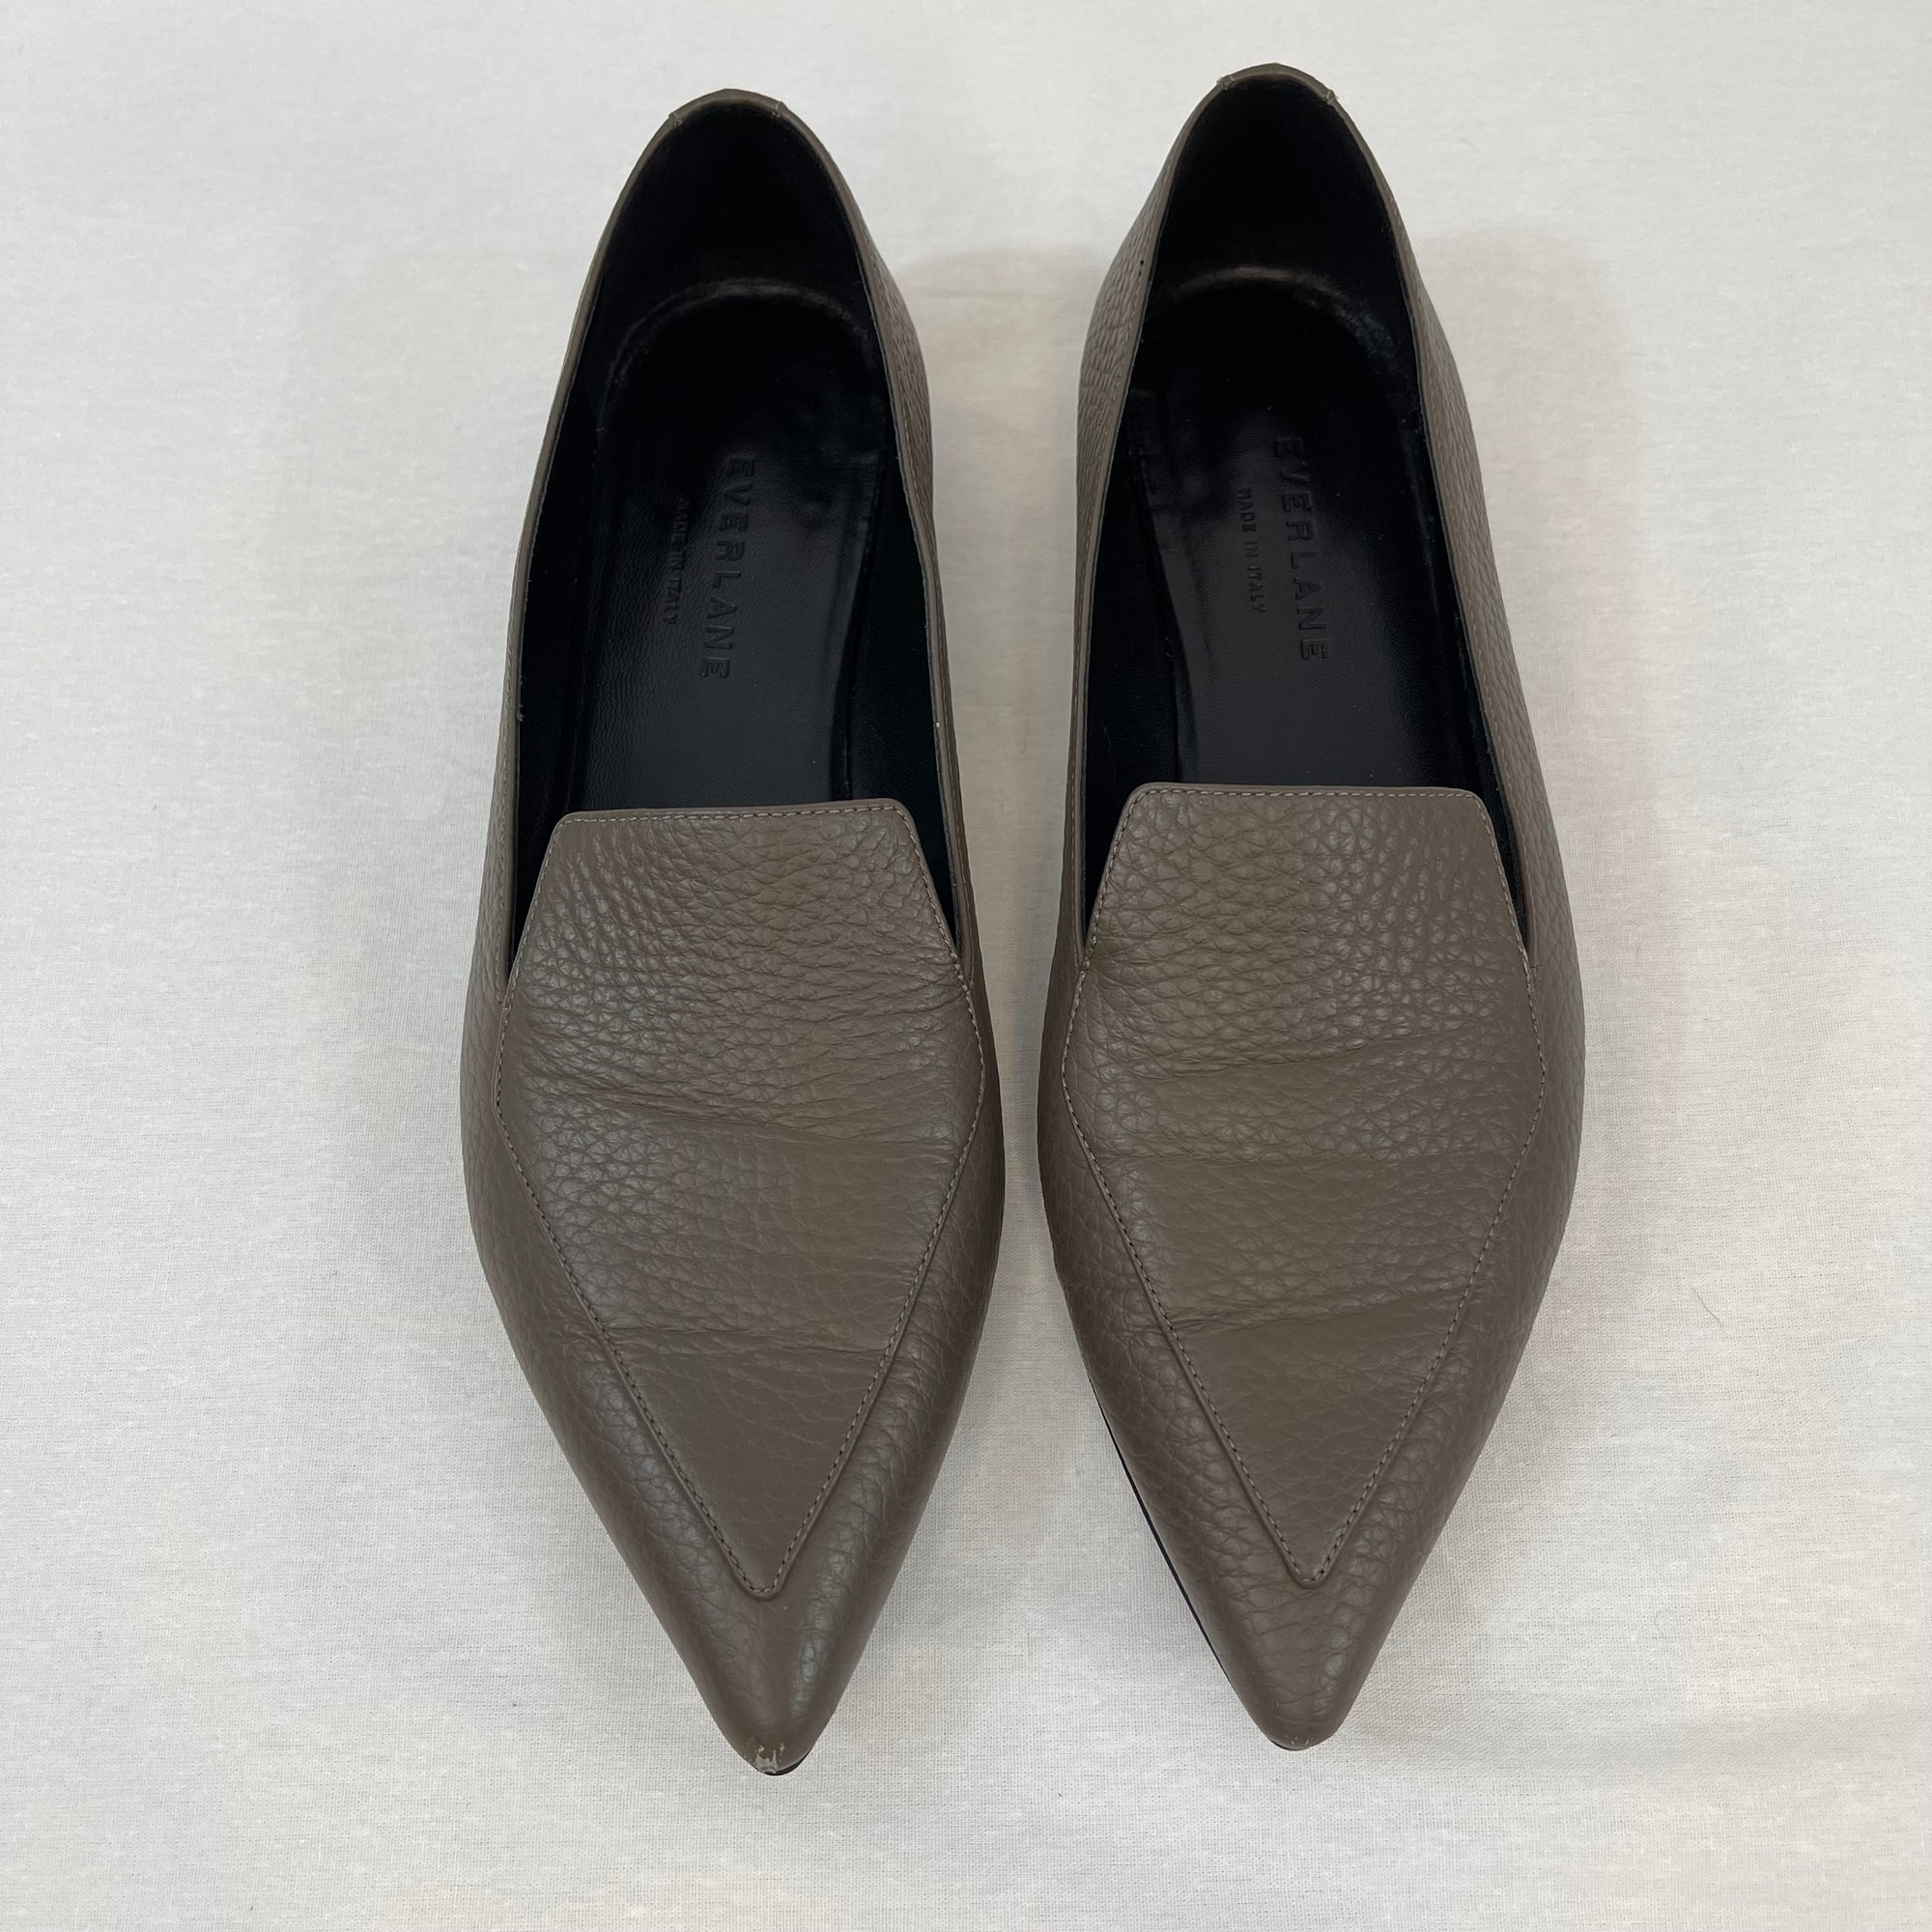 Everlane Leather Pointed Toe Flats size 7.5